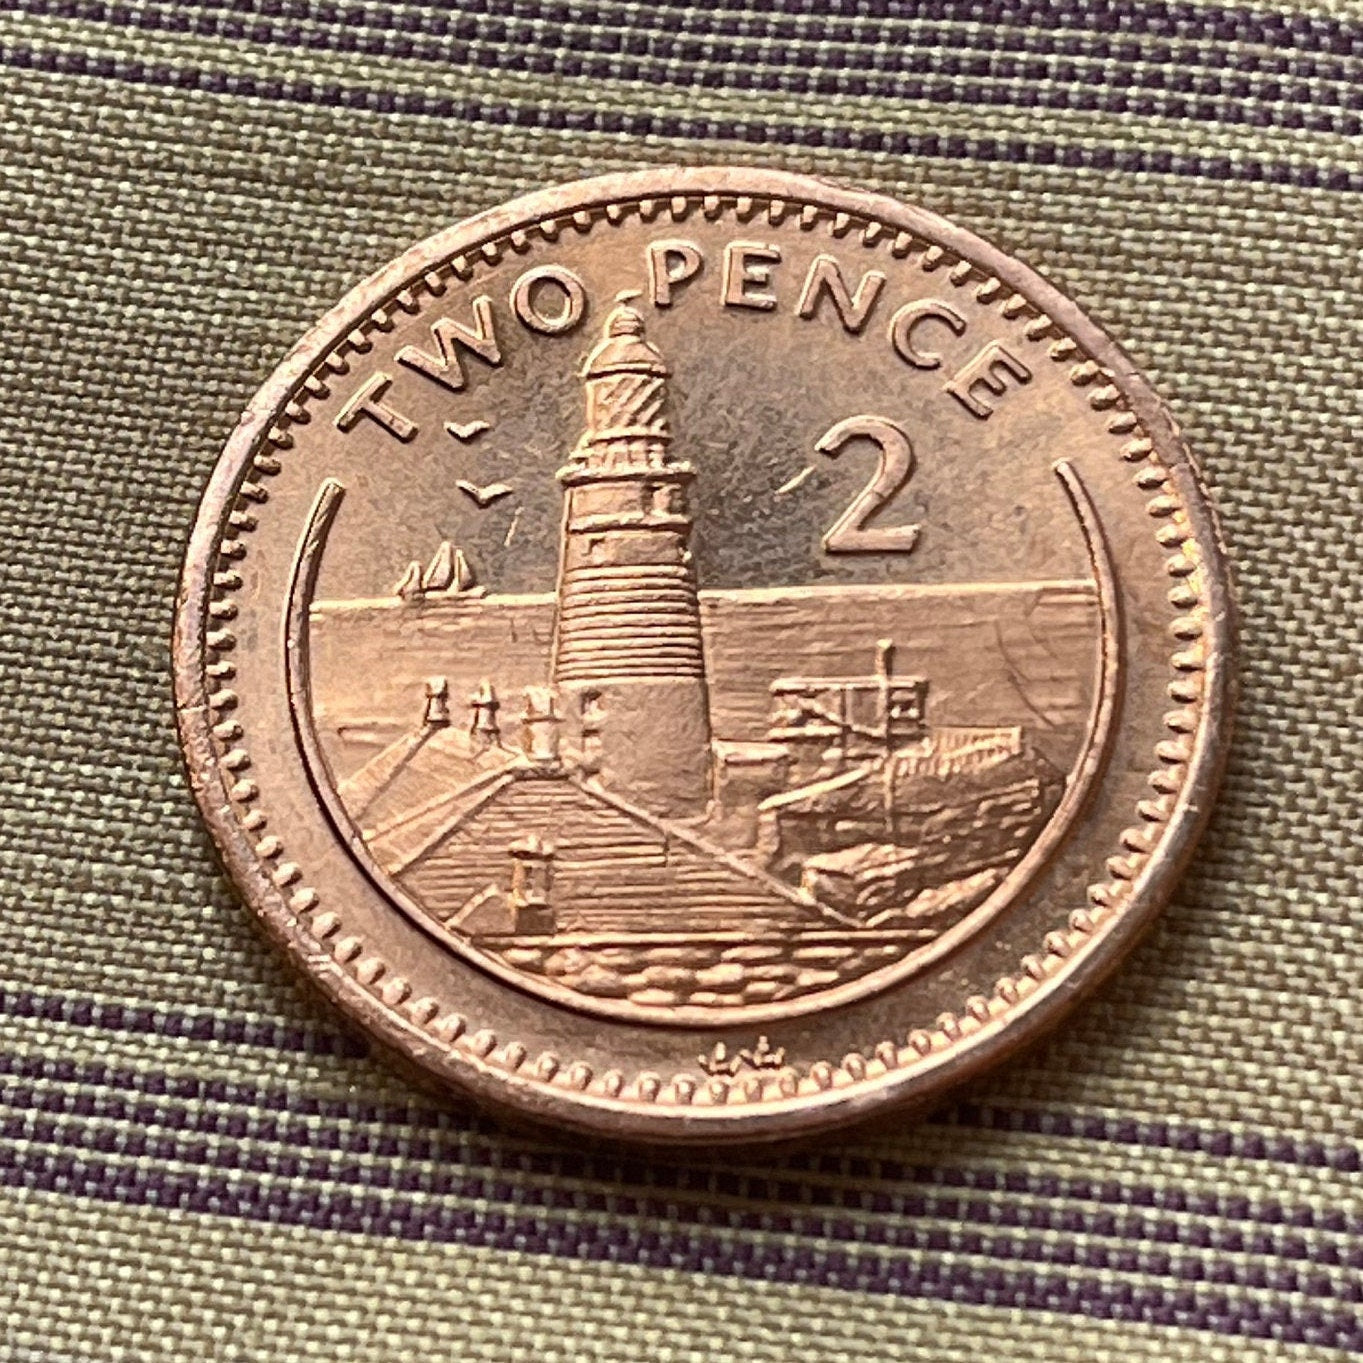 Europa Point Lighthouse Gibraltar 2 Pence Authentic Coin Money for Jewelry and Craft Making